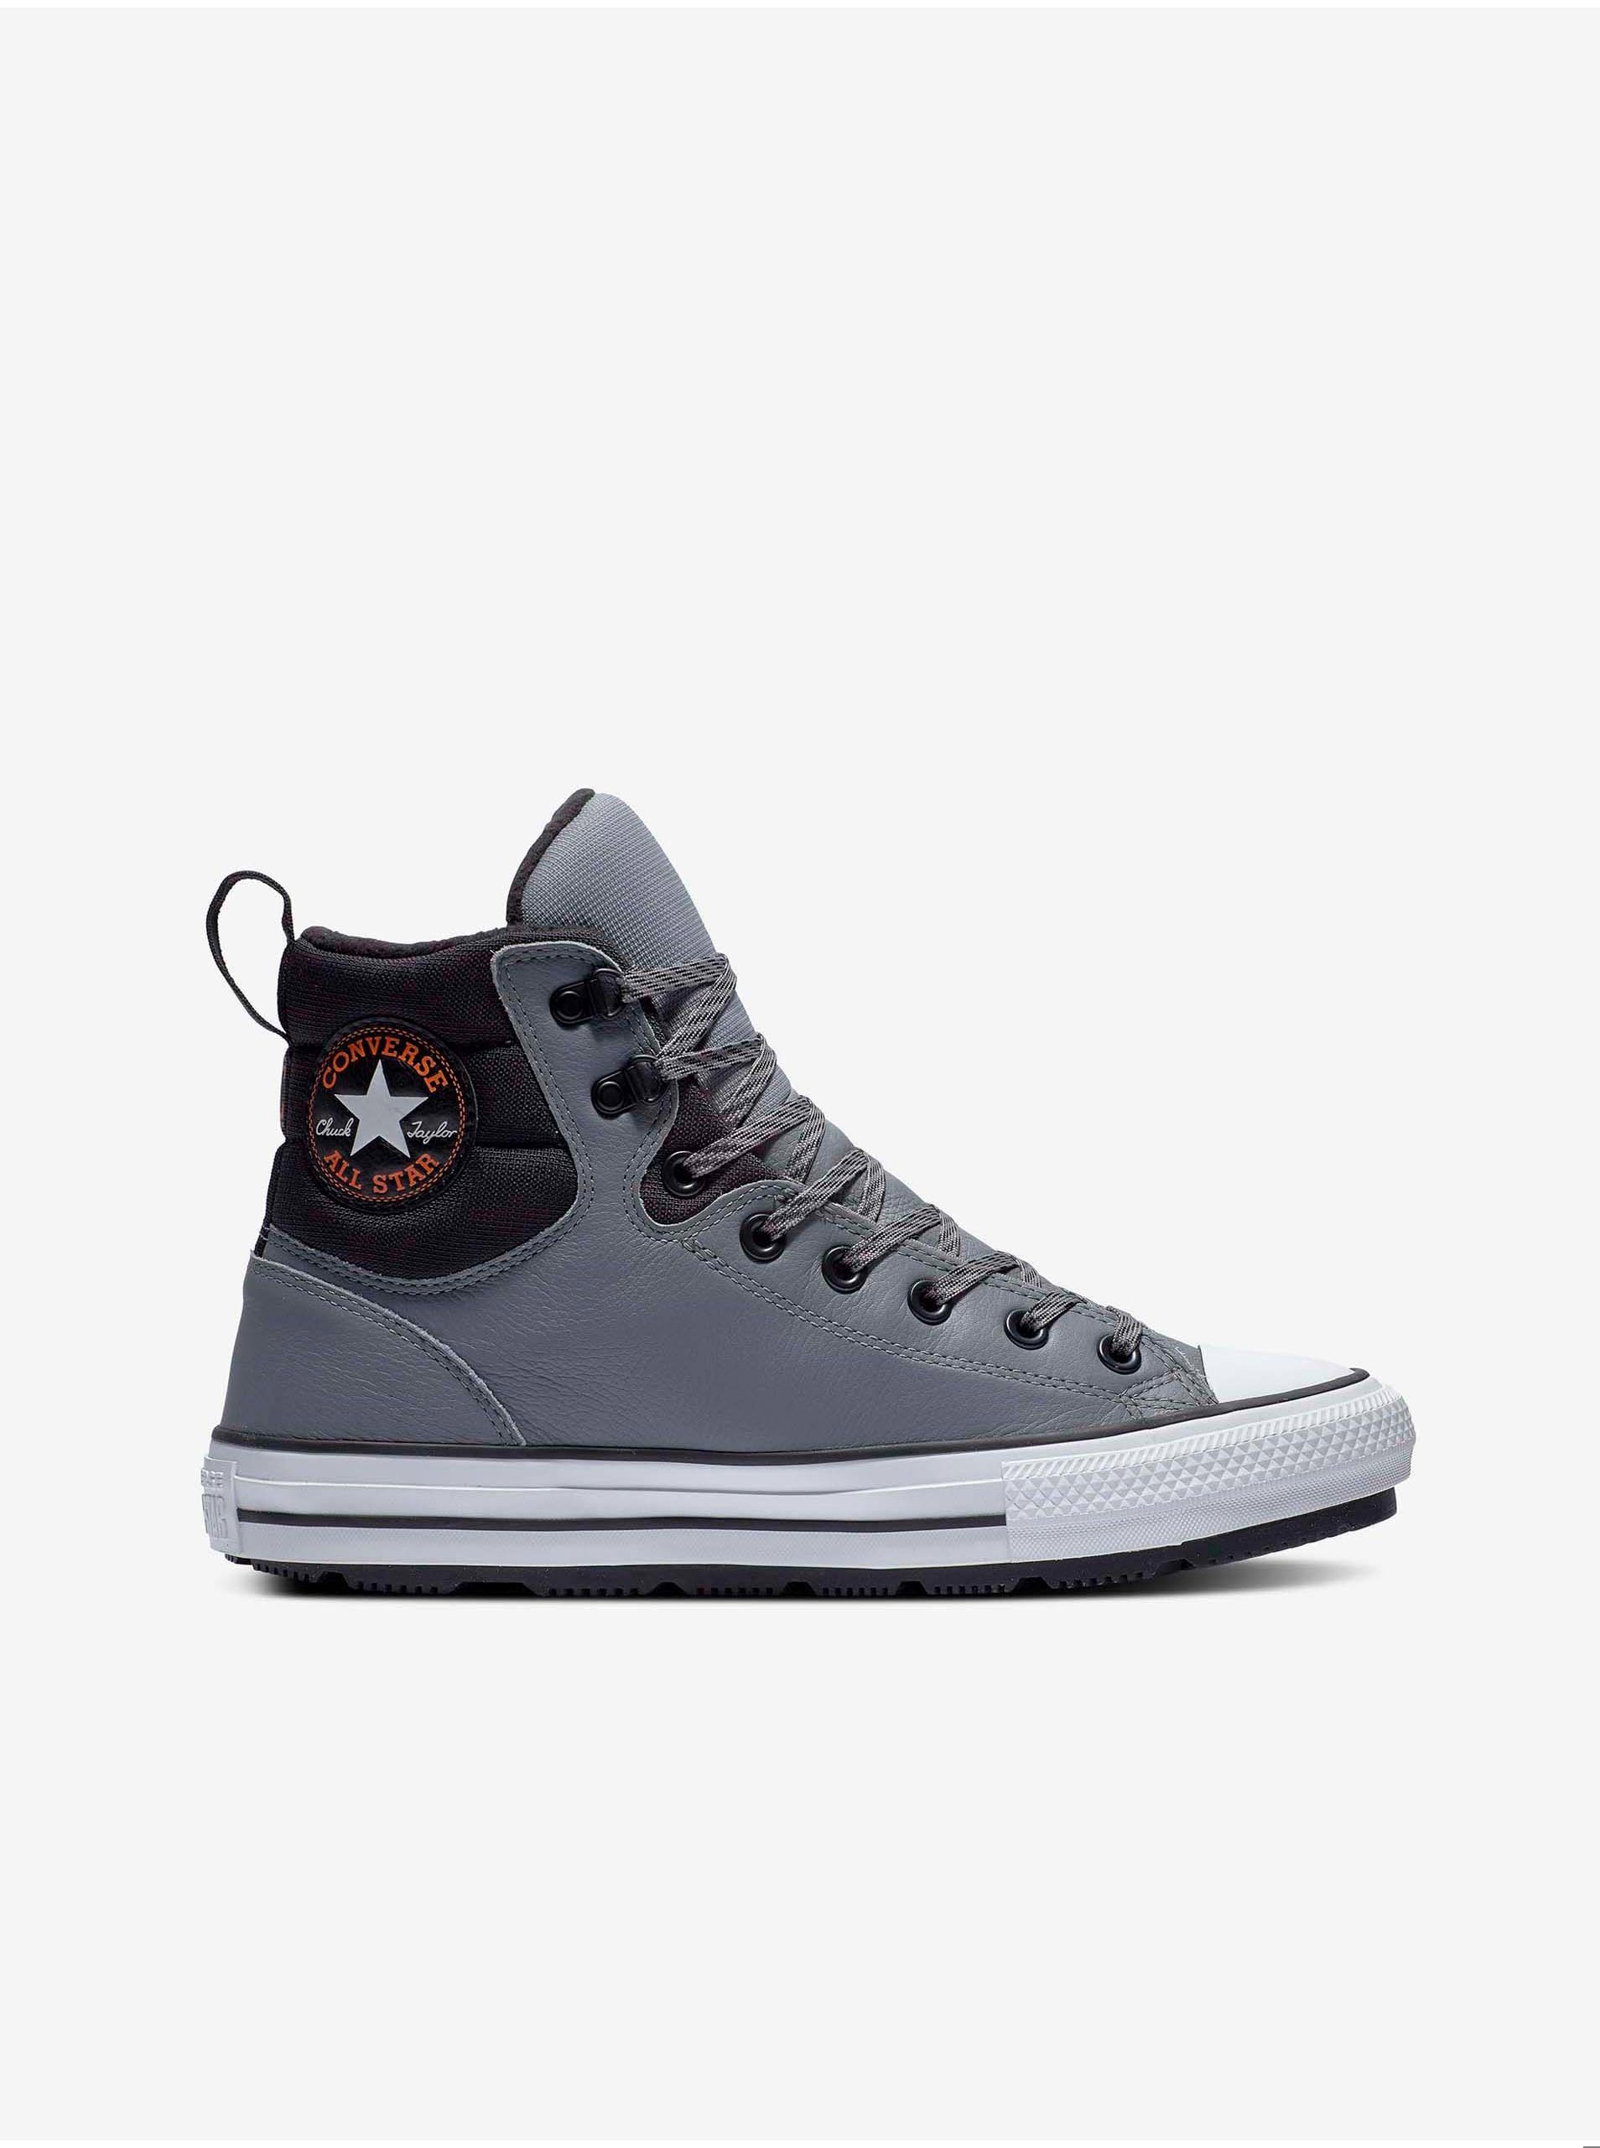 Converse Chuck Taylor All Star Berkshire Leather